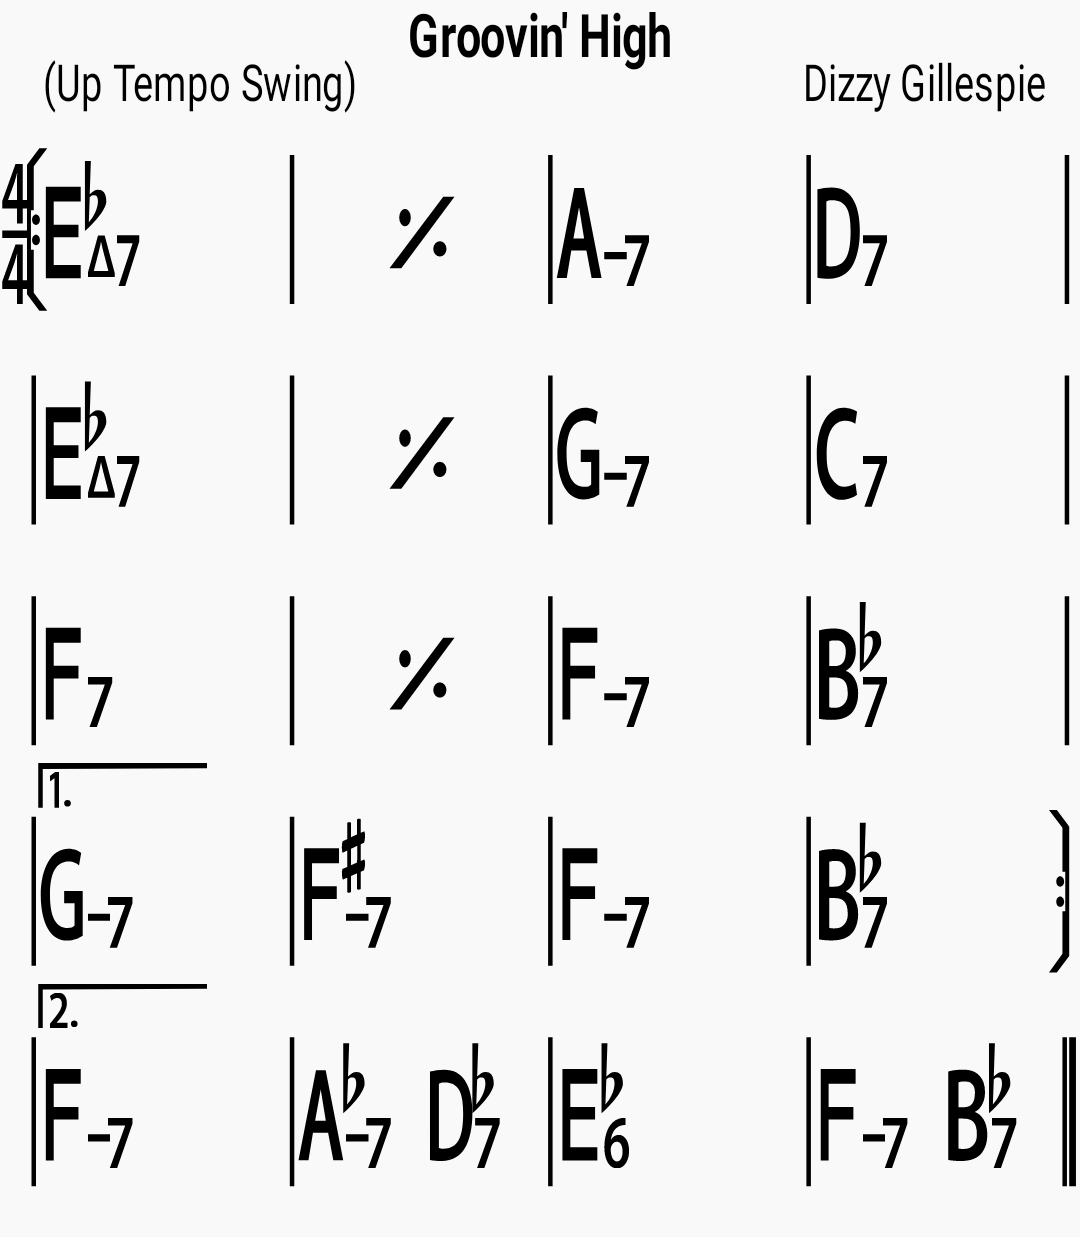 Chord chart for the jazz standard Groovin High